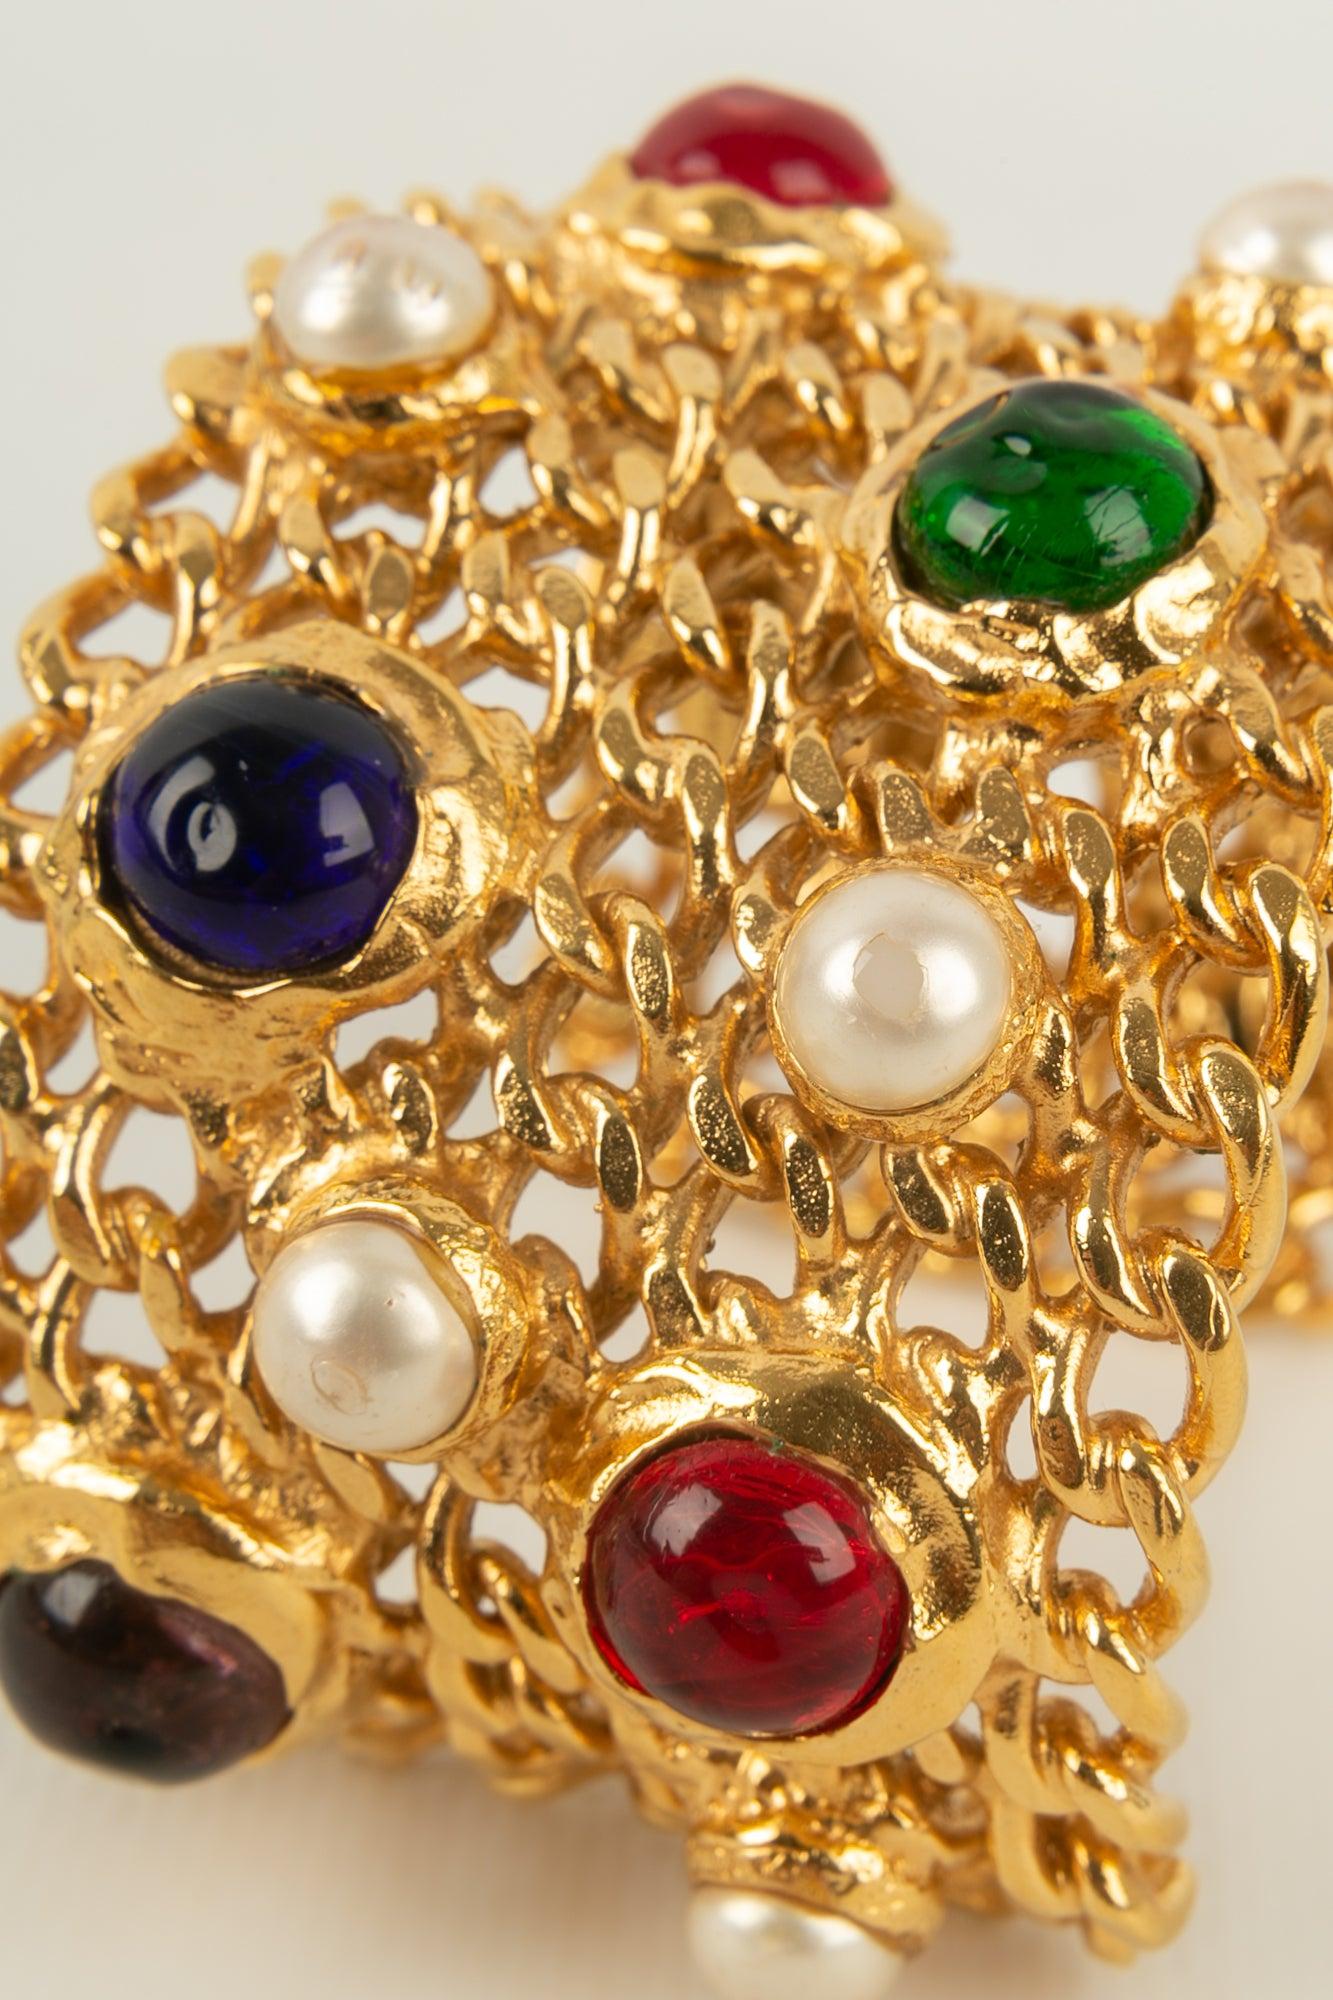 Chanel Cuff Bracelet in Golden Metal with Cabochons For Sale 3